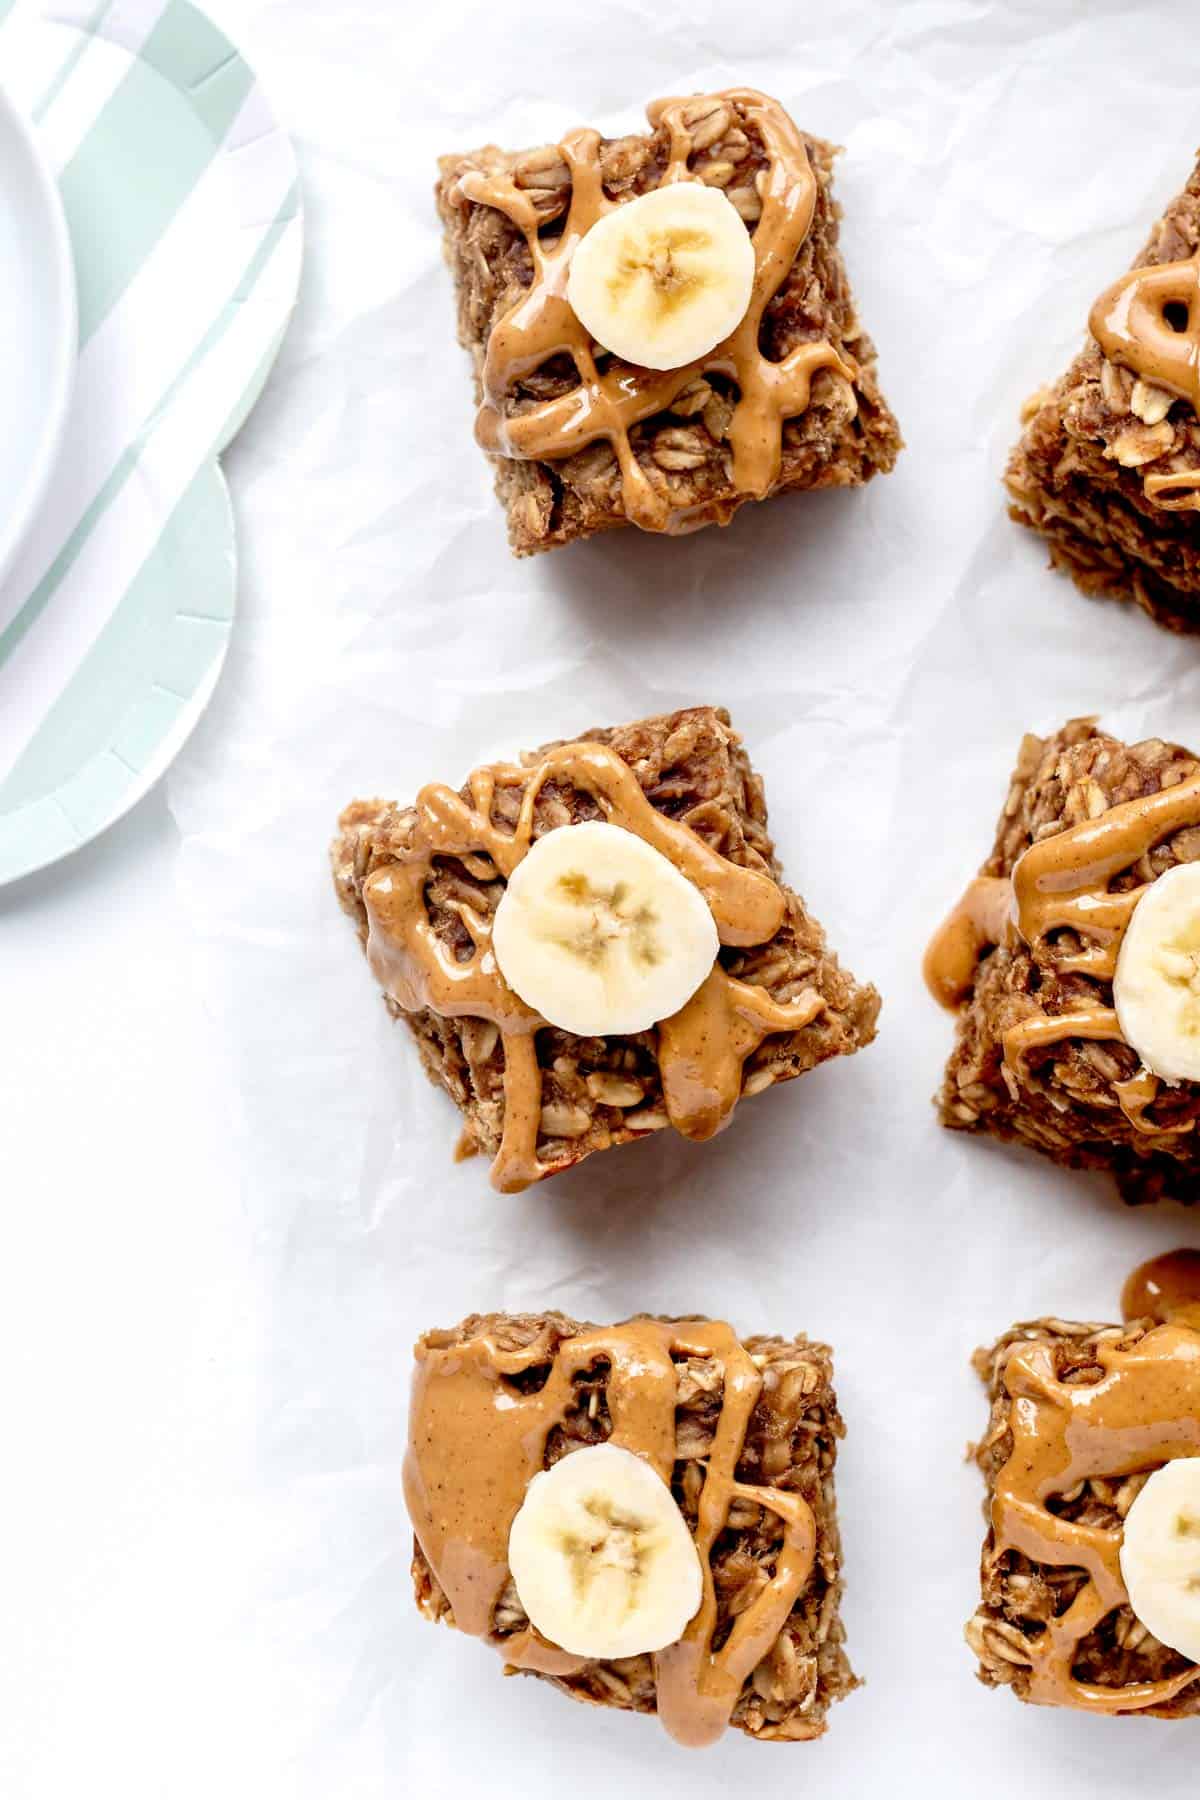 Baked oatmeal bars with banana slices and peanut butter.